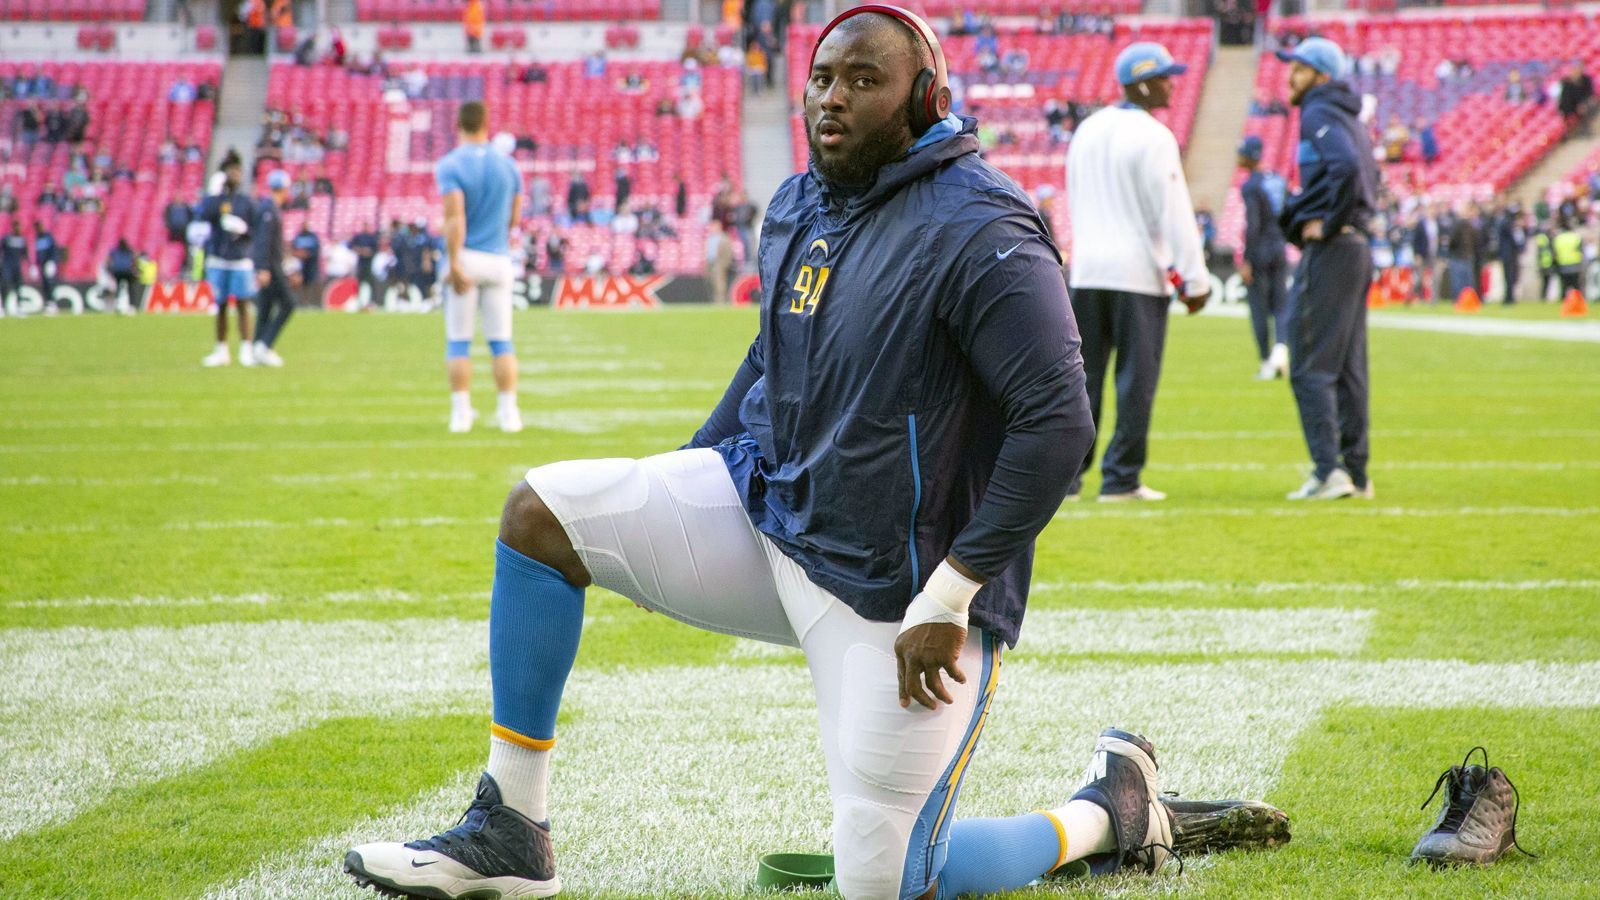 
                <strong>Los Angeles Chargers: Corey Liuget</strong><br>
                Position: Defensive Tackle
              